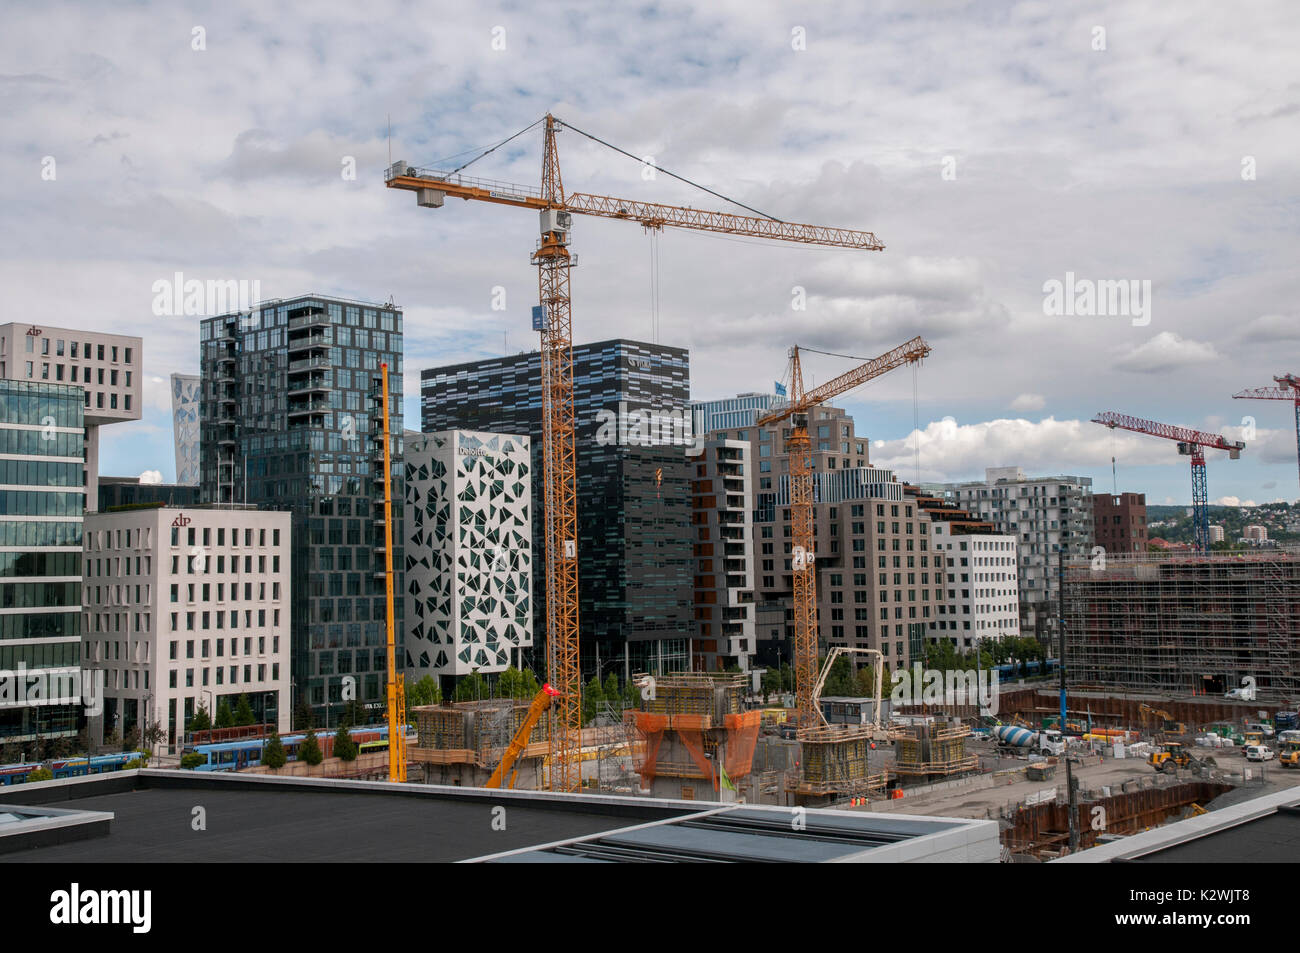 Construction work going on around the Barcode development in Bjørvika, central Oslo, as seen from the Oslo Opera House. Stock Photo